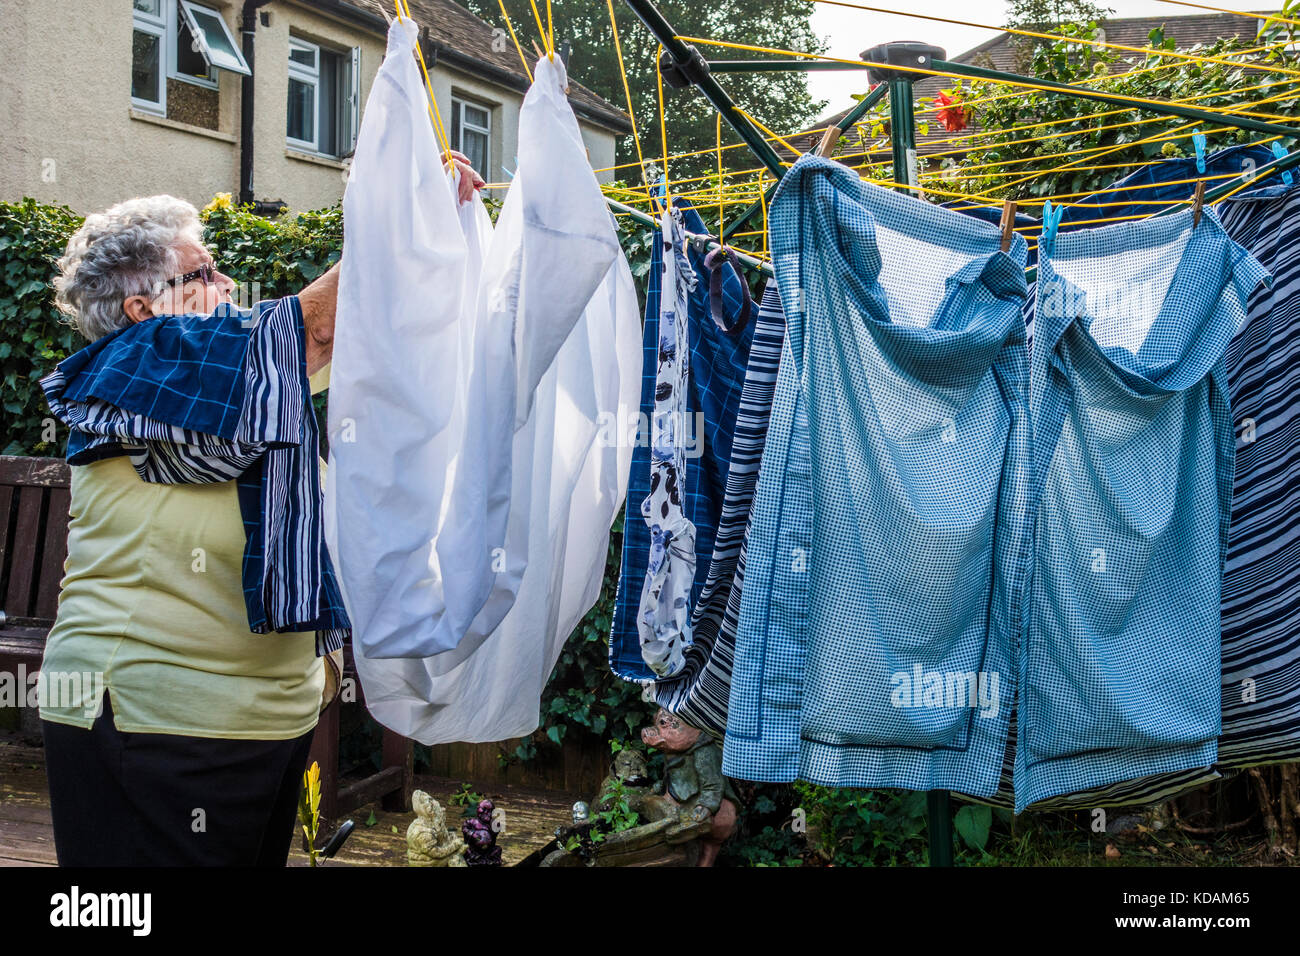 An old / elderly / senior lady (age 80) hanging out wet washing in her garden, on a warm day, early autumn. South Ealing, West London W5, England, UK. Stock Photo